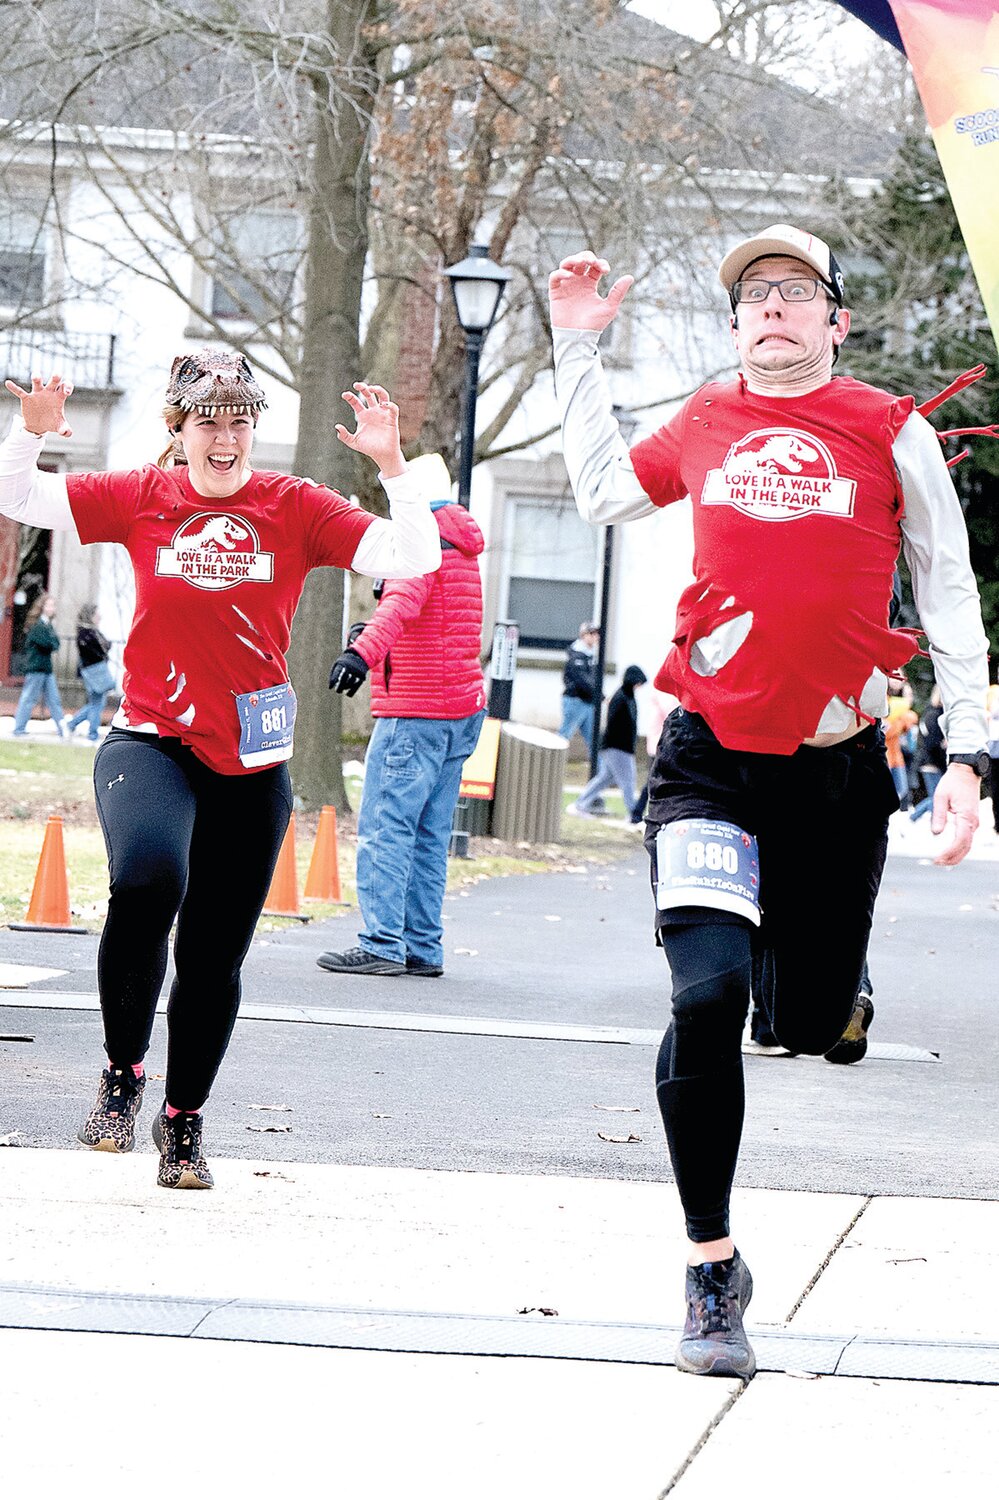 Melissa Showalter, wearing a dinosaur hat, chases her fiance, Kevin Ruhf, across the finish line during the Great Cupid Run, an event he organized. Proceeds raised from the day go to the Bucks County Opportunity Council.